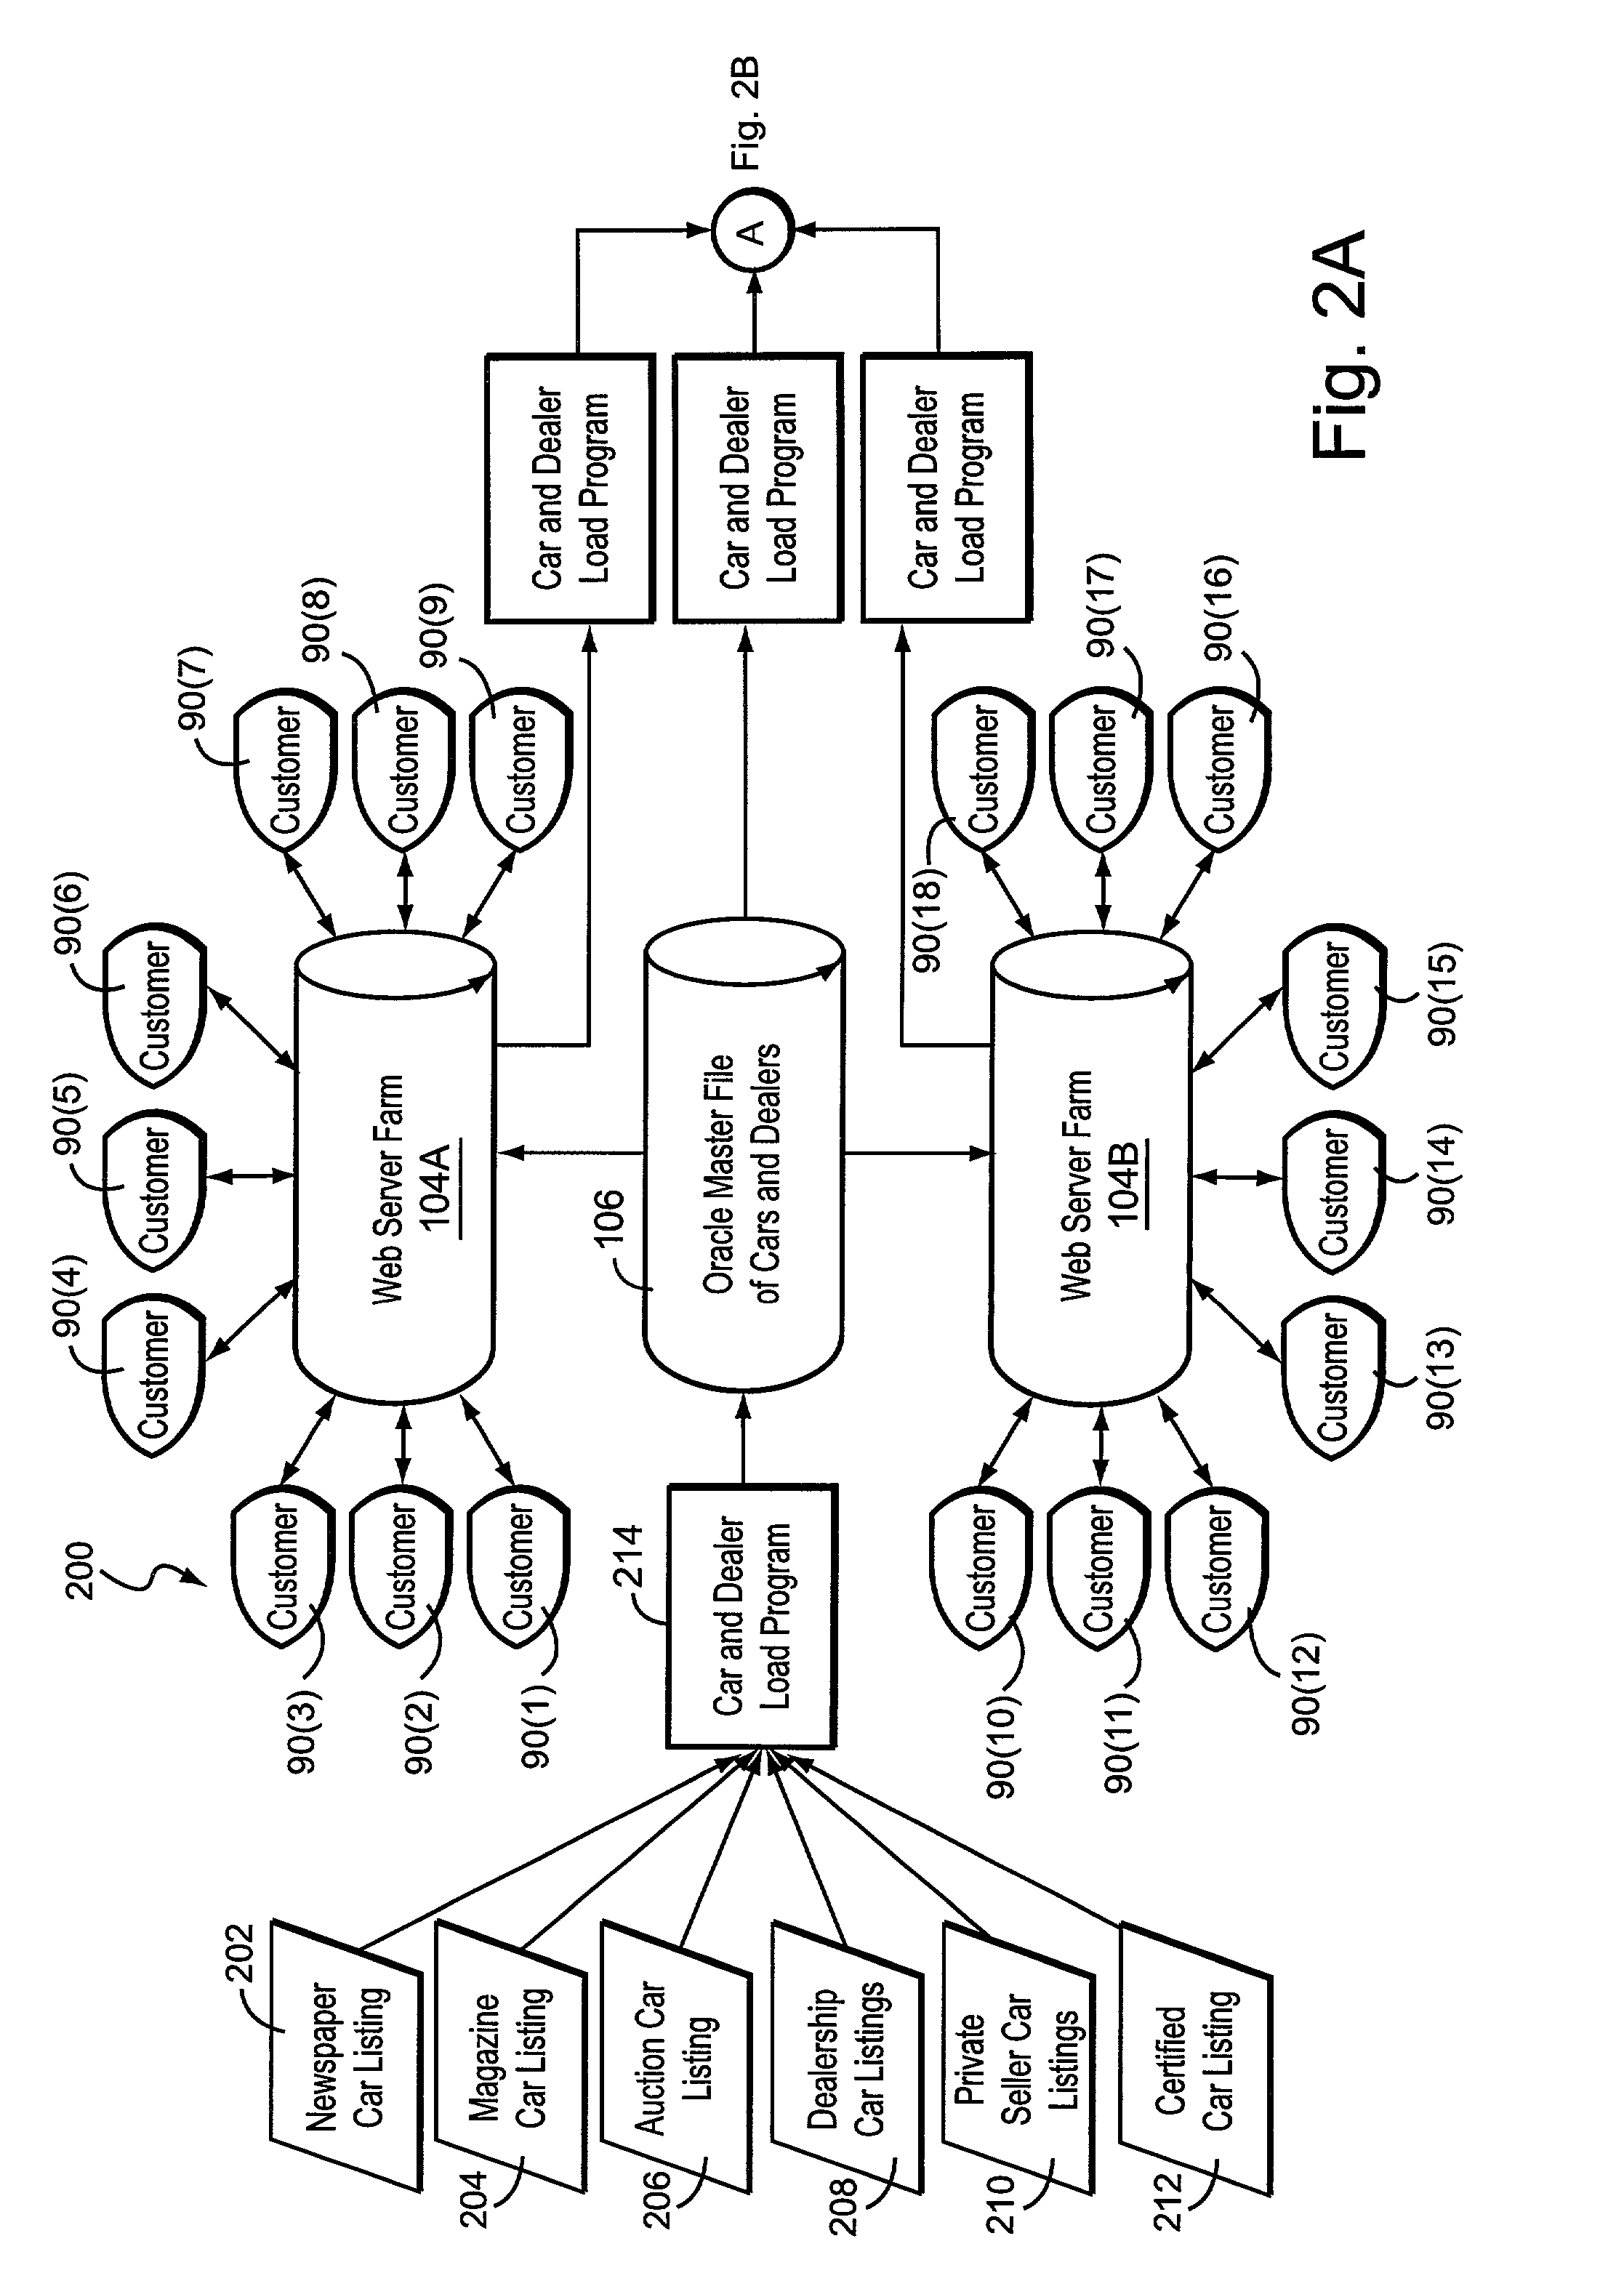 Computer-based system and method for determining a quantitative scarcity index value based on online computer search activities